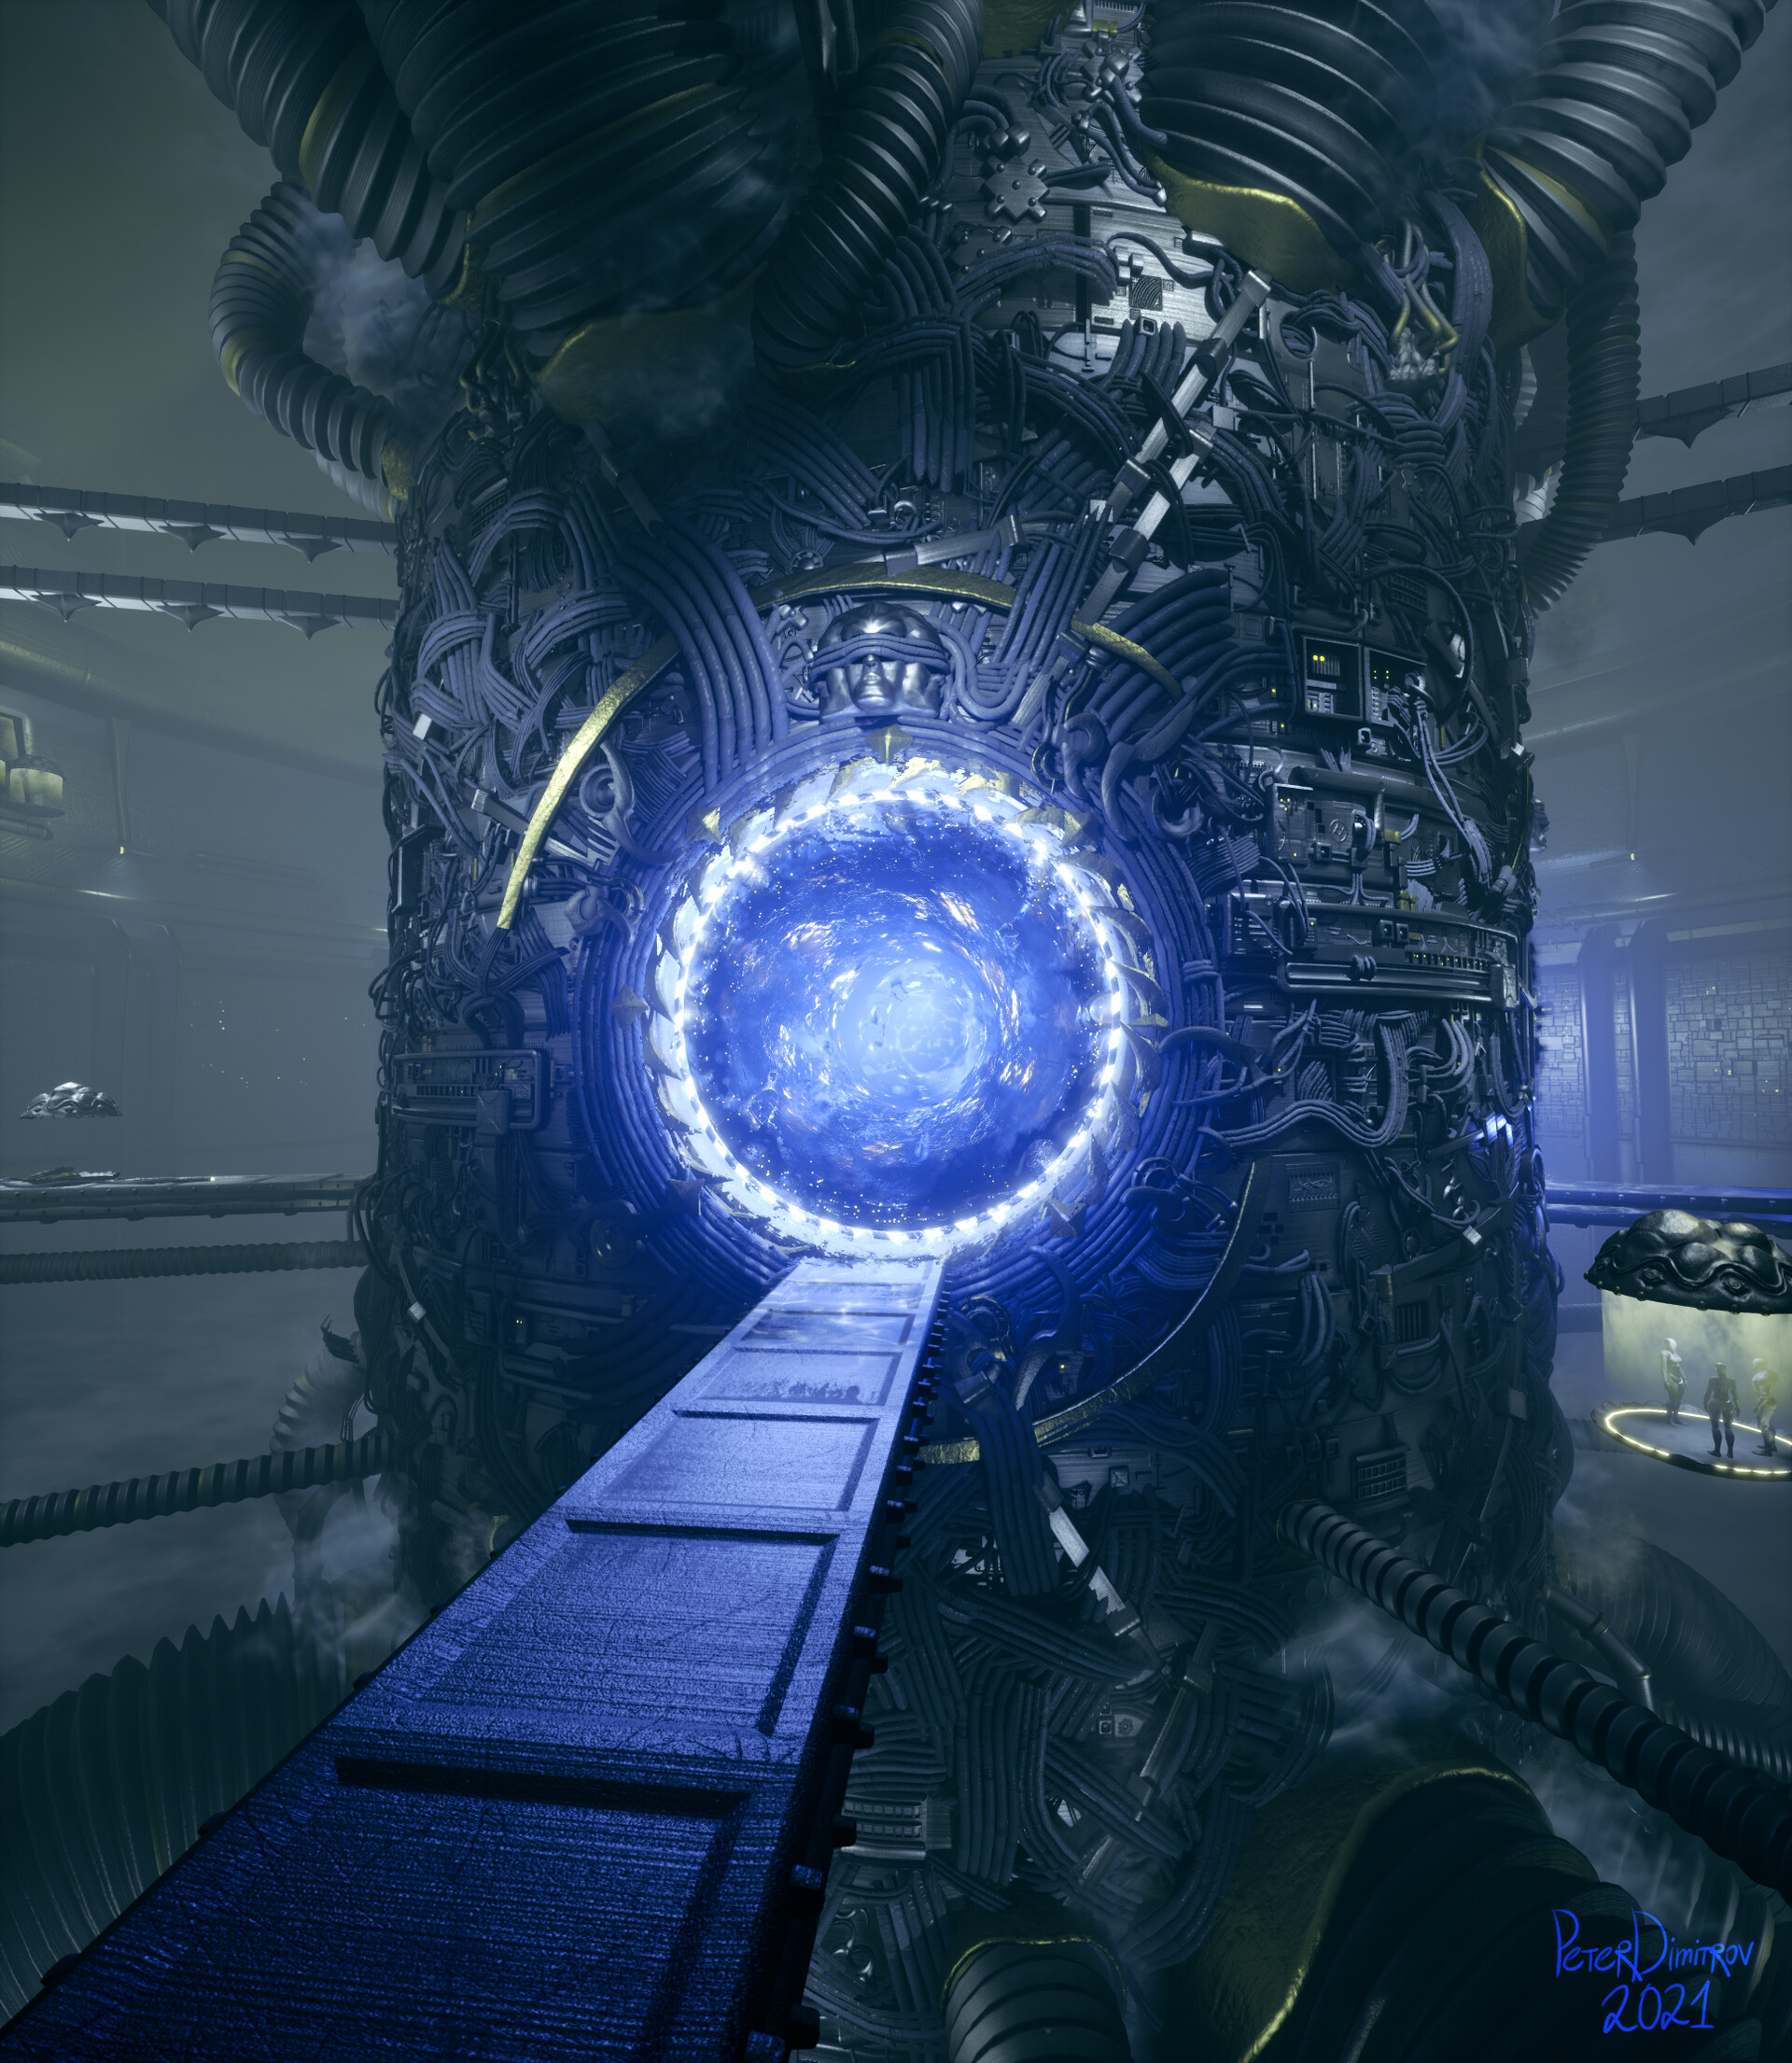 Portrait shot of the portal and the megastructure. A narrow, metal platform goes towards the portal. Its surface is lit in blue in a dramatic way. A small platform with people is to the right side.